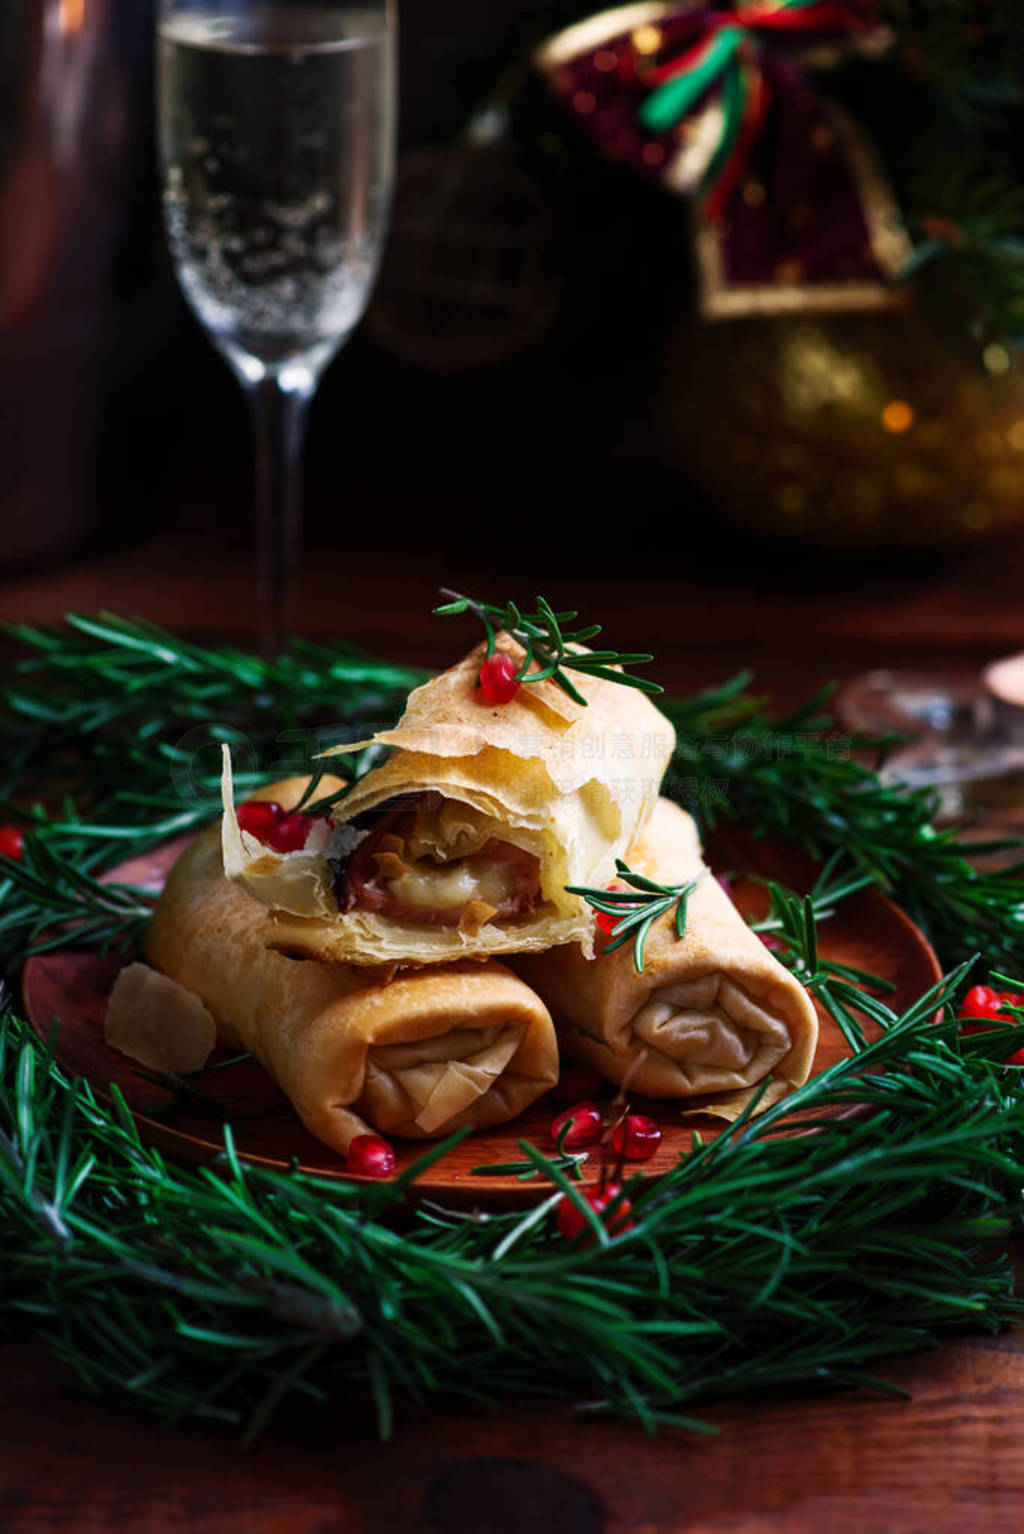 baked brie and prosciutto rolls a Christmas decor.